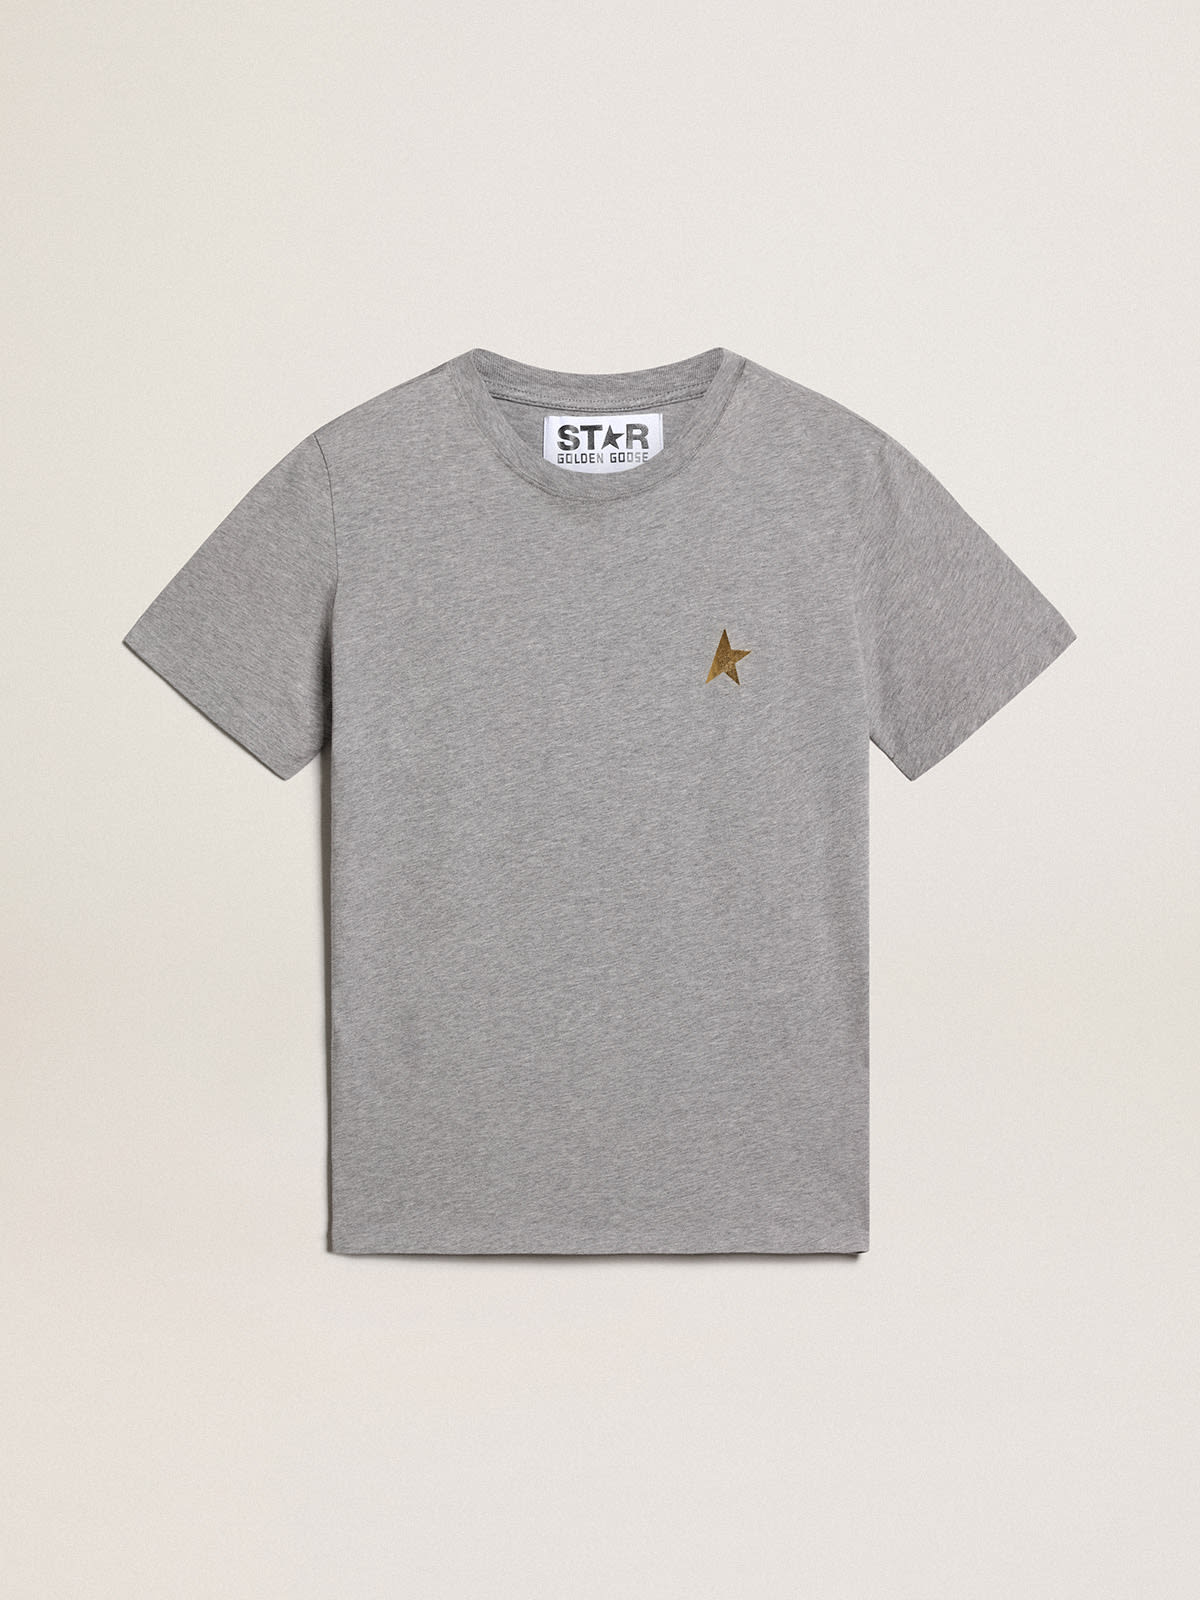 Golden Goose - Women's mélange gray T-shirt with gold star on the front in 